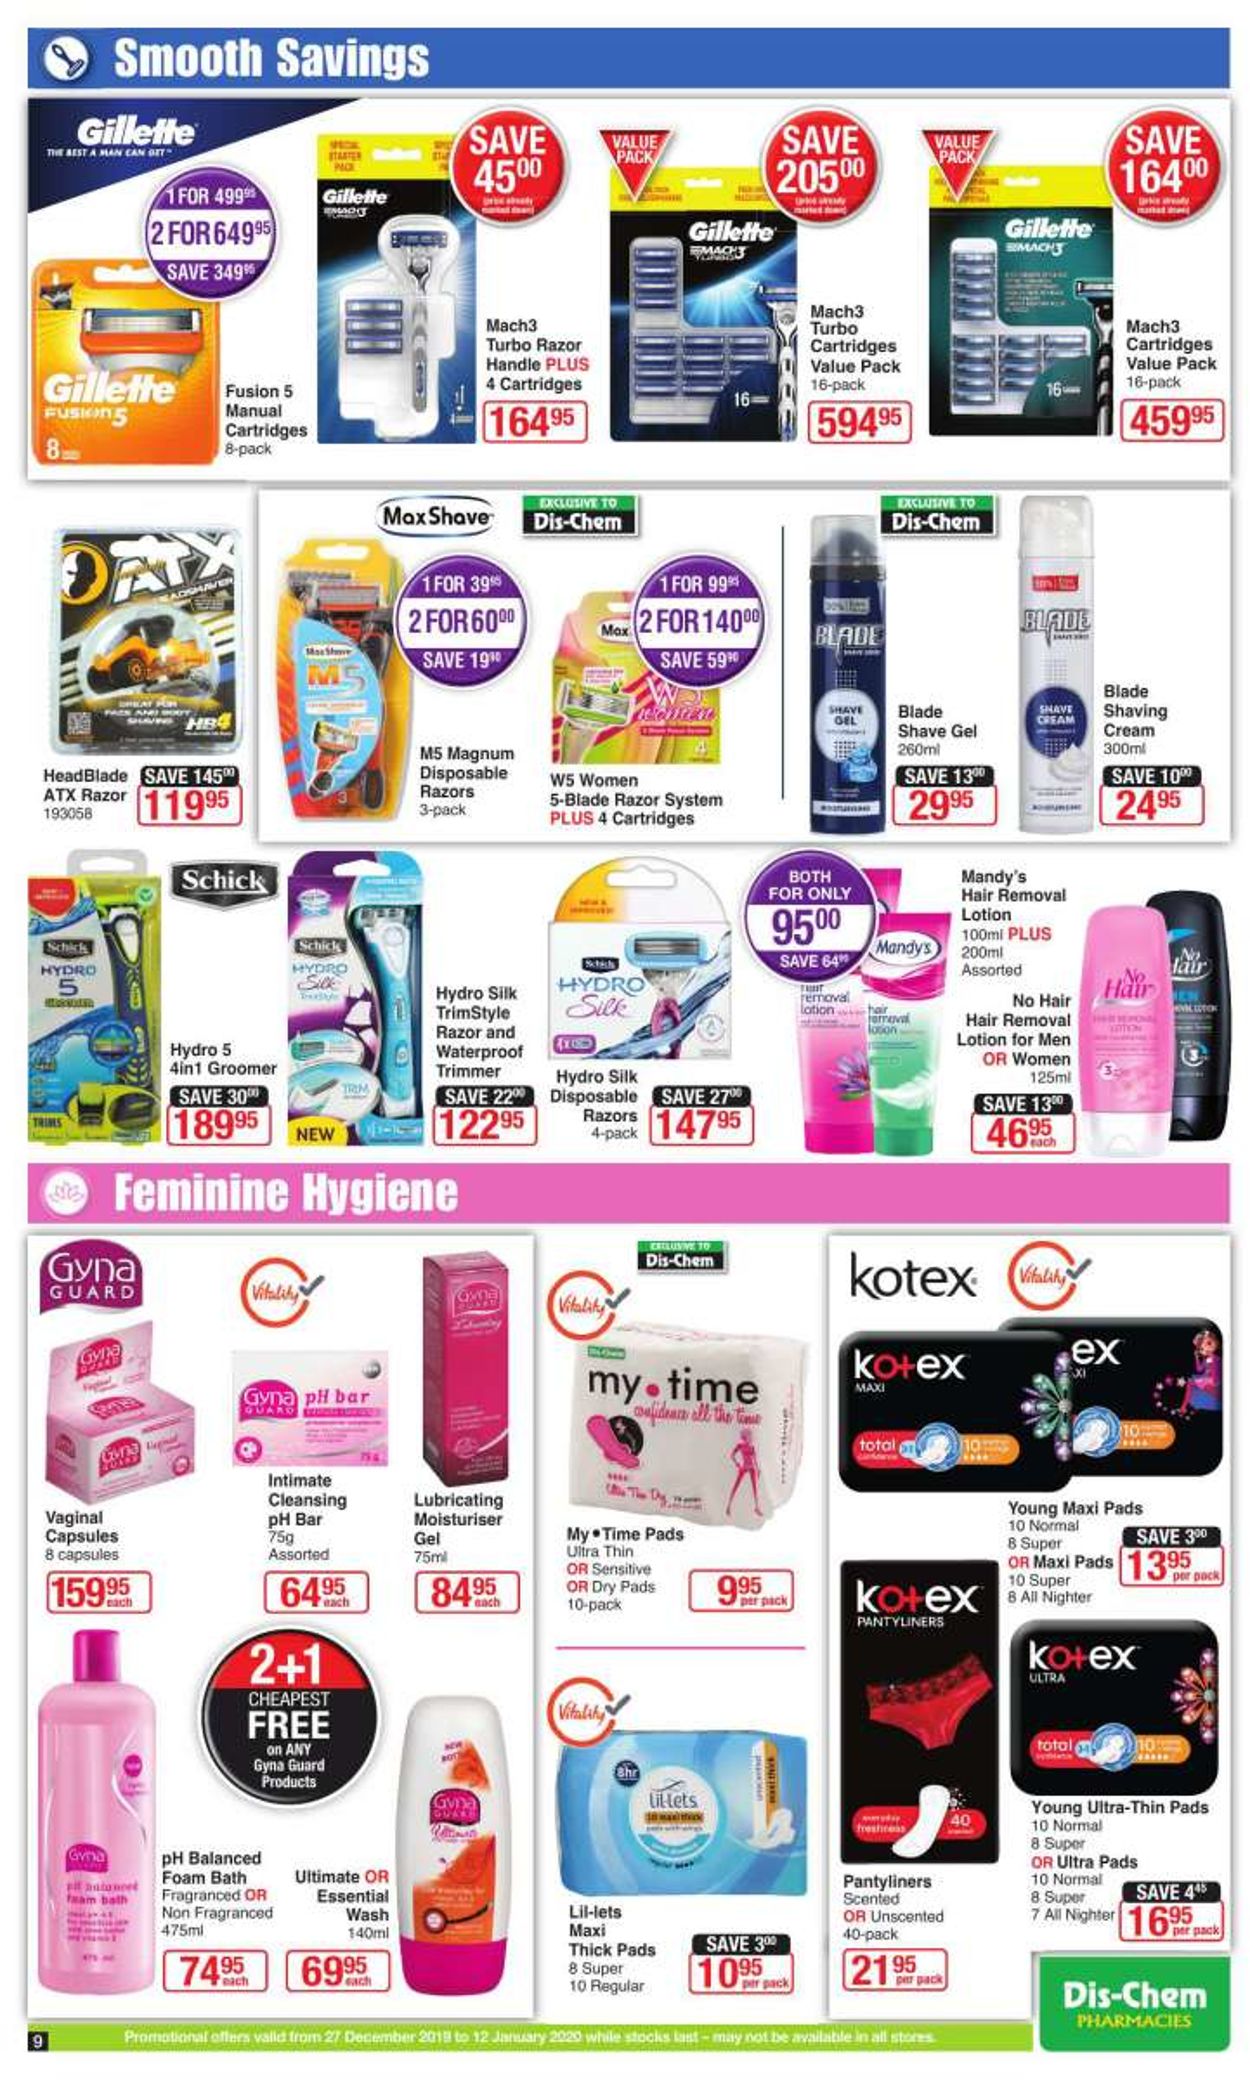 Dis-Chem New Year 19/20 Catalogue - 2019/12/27-2020/01/12 (Page 9)